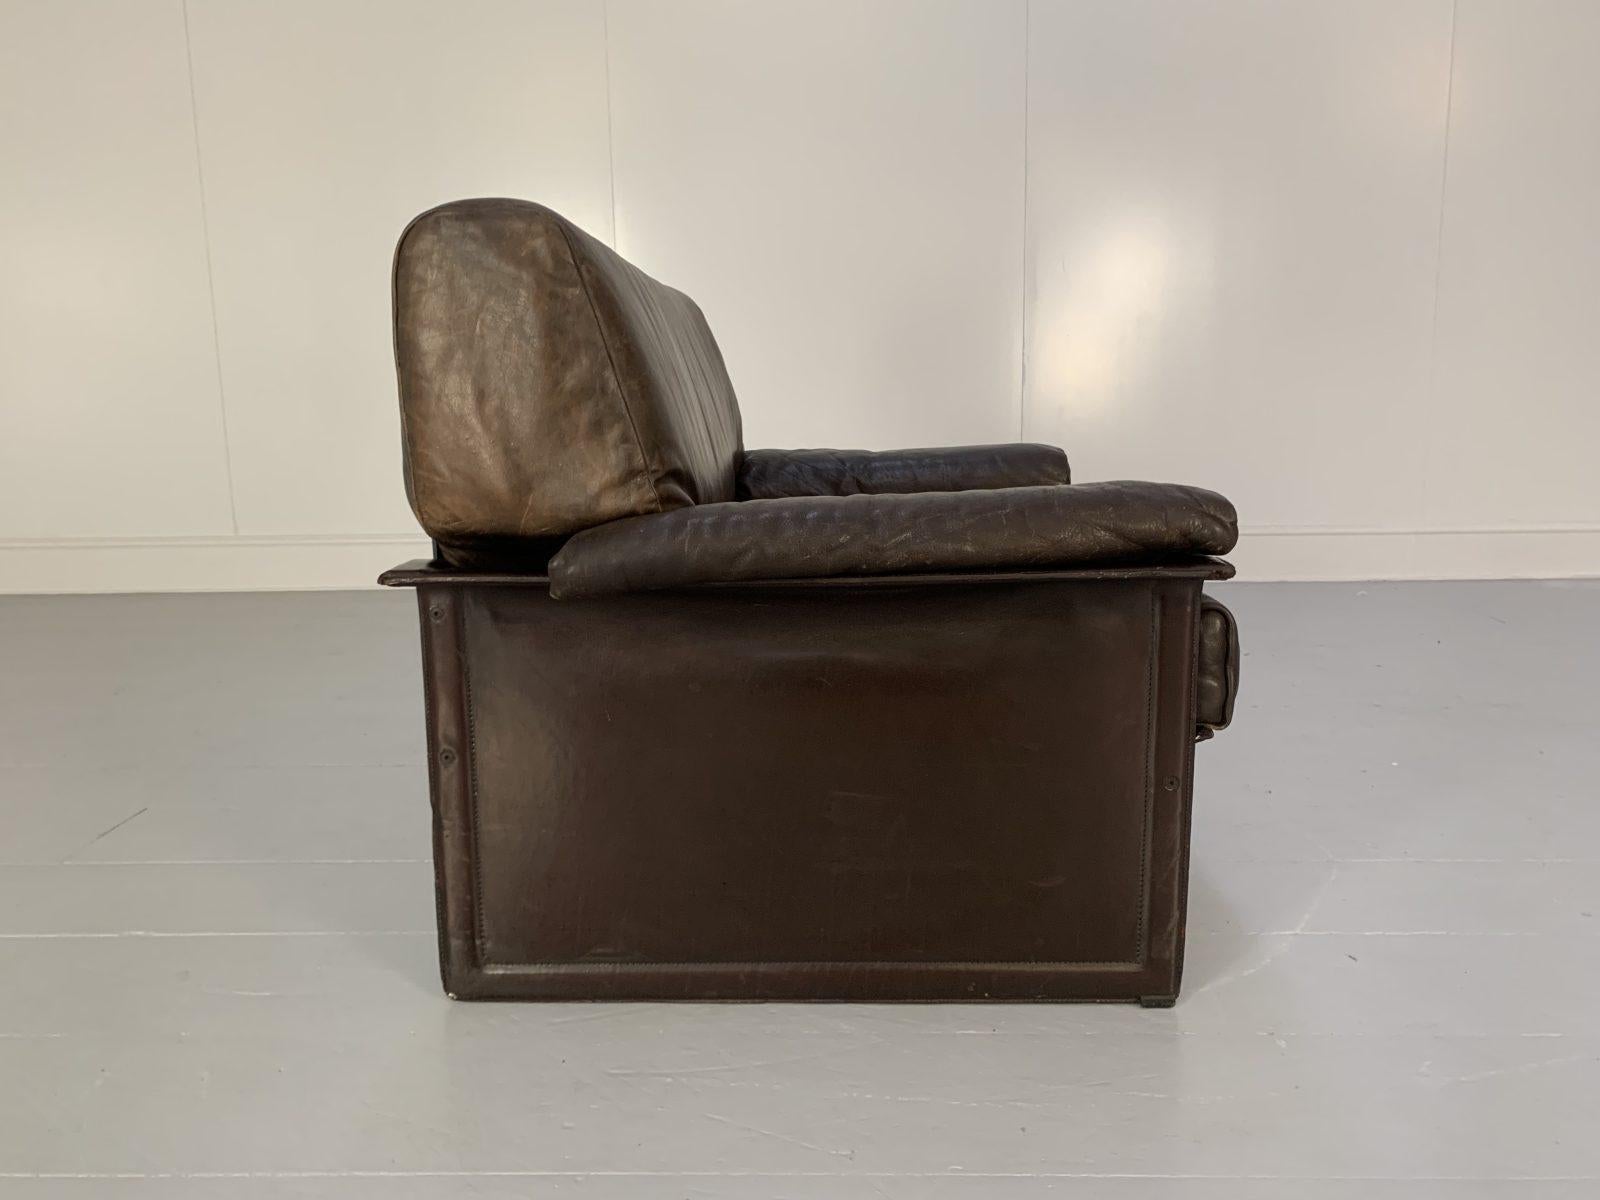 Pair of Matteo Grassi “Tm” Armchairs – in Vintage Brown Leather For Sale 3